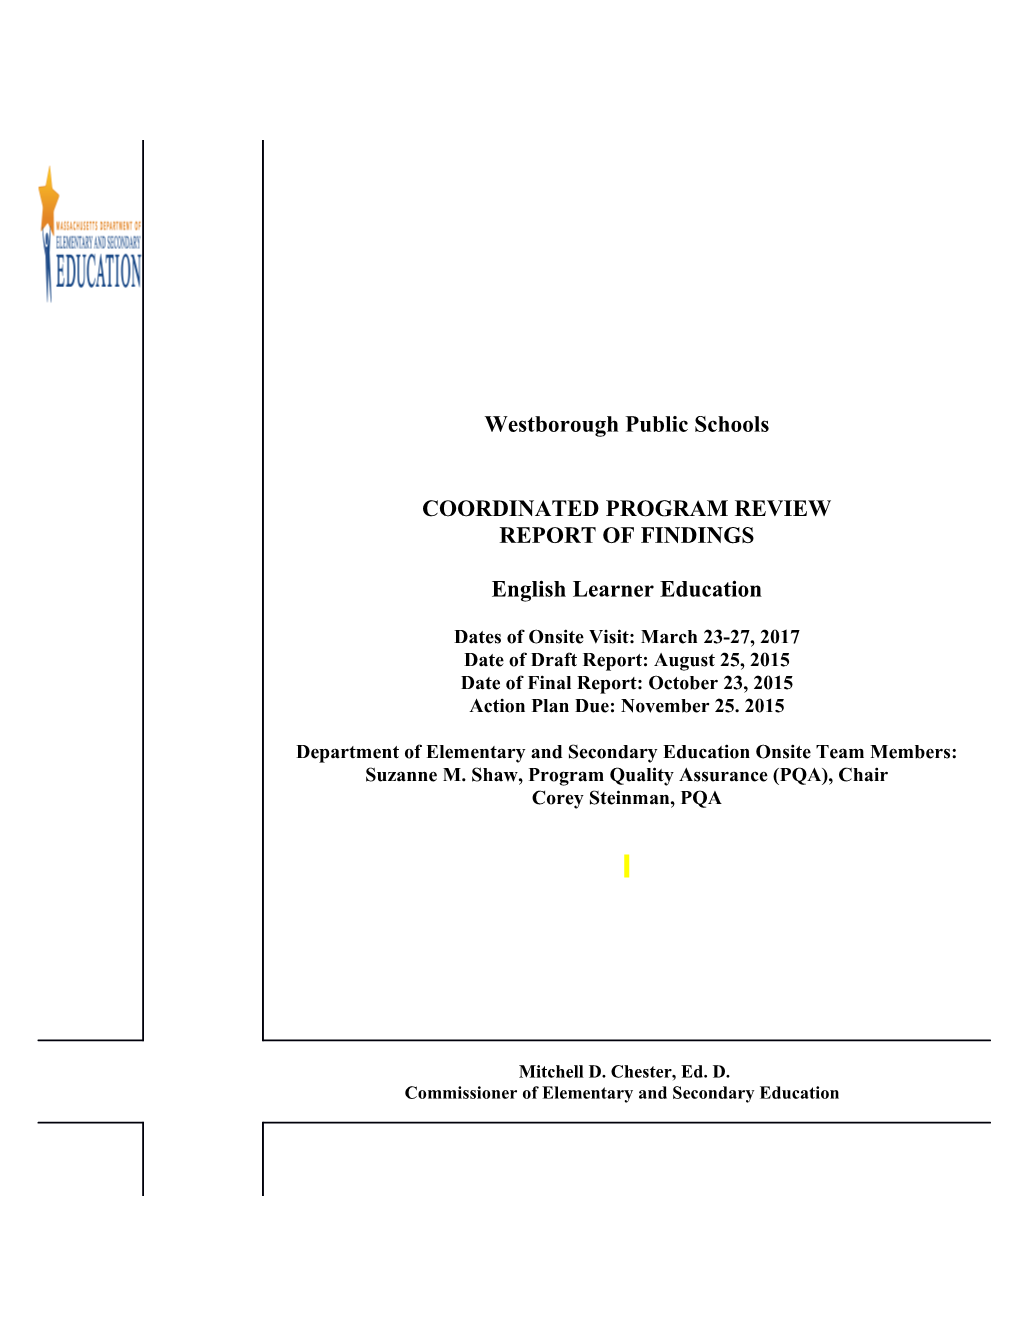 Westborough PS ELE CPR Final Report 2014-15